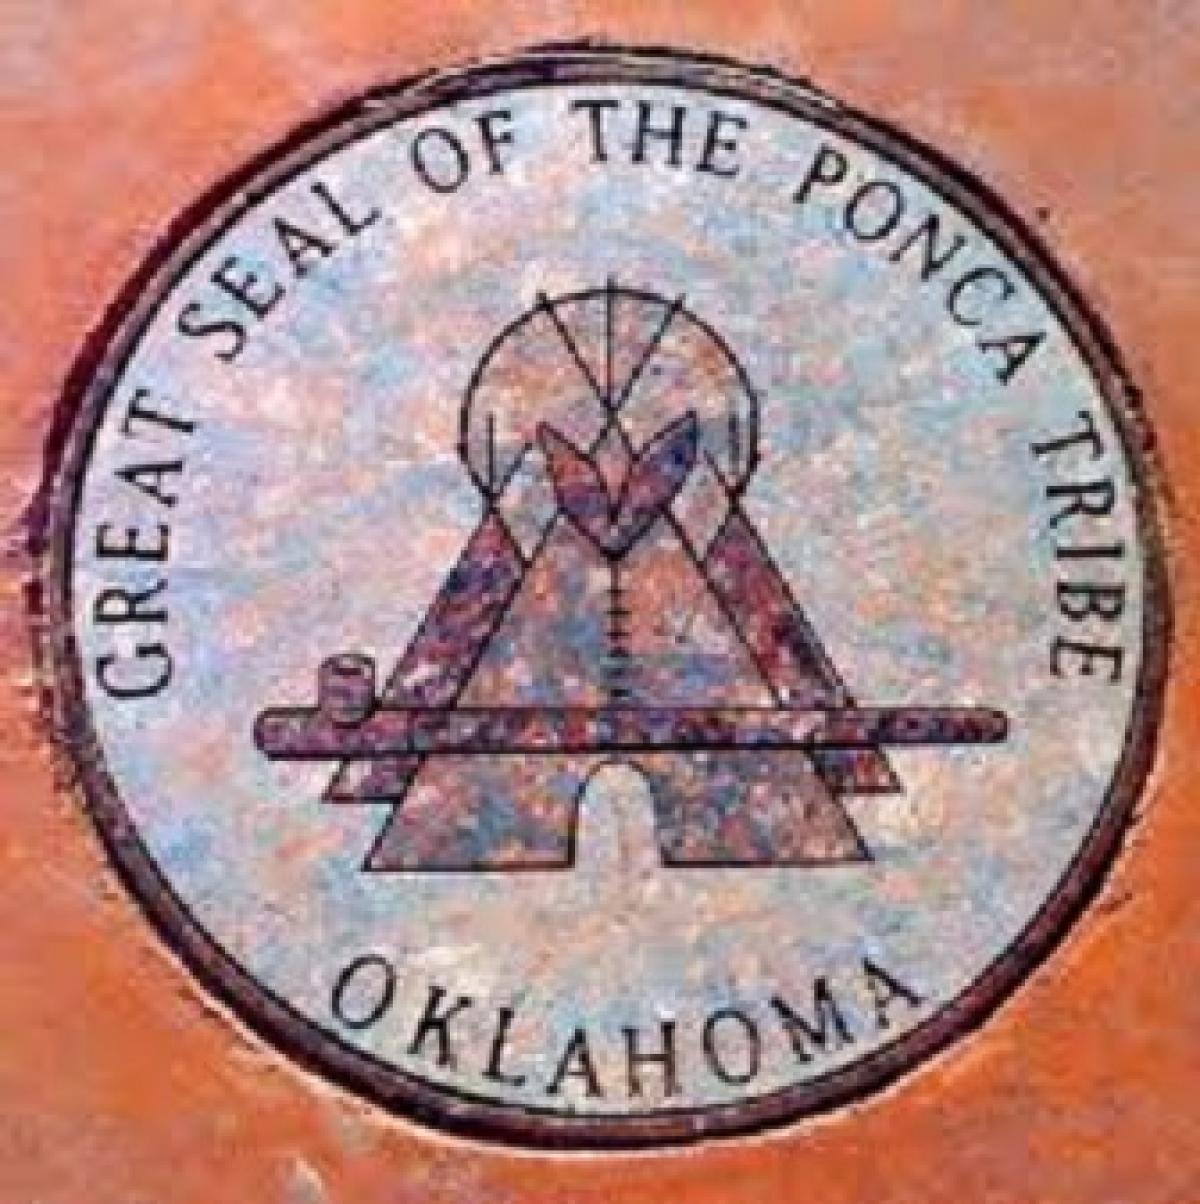 OK, Grove, Headstone Symbols and Meanings, Seal, Ponca Tribe of OK